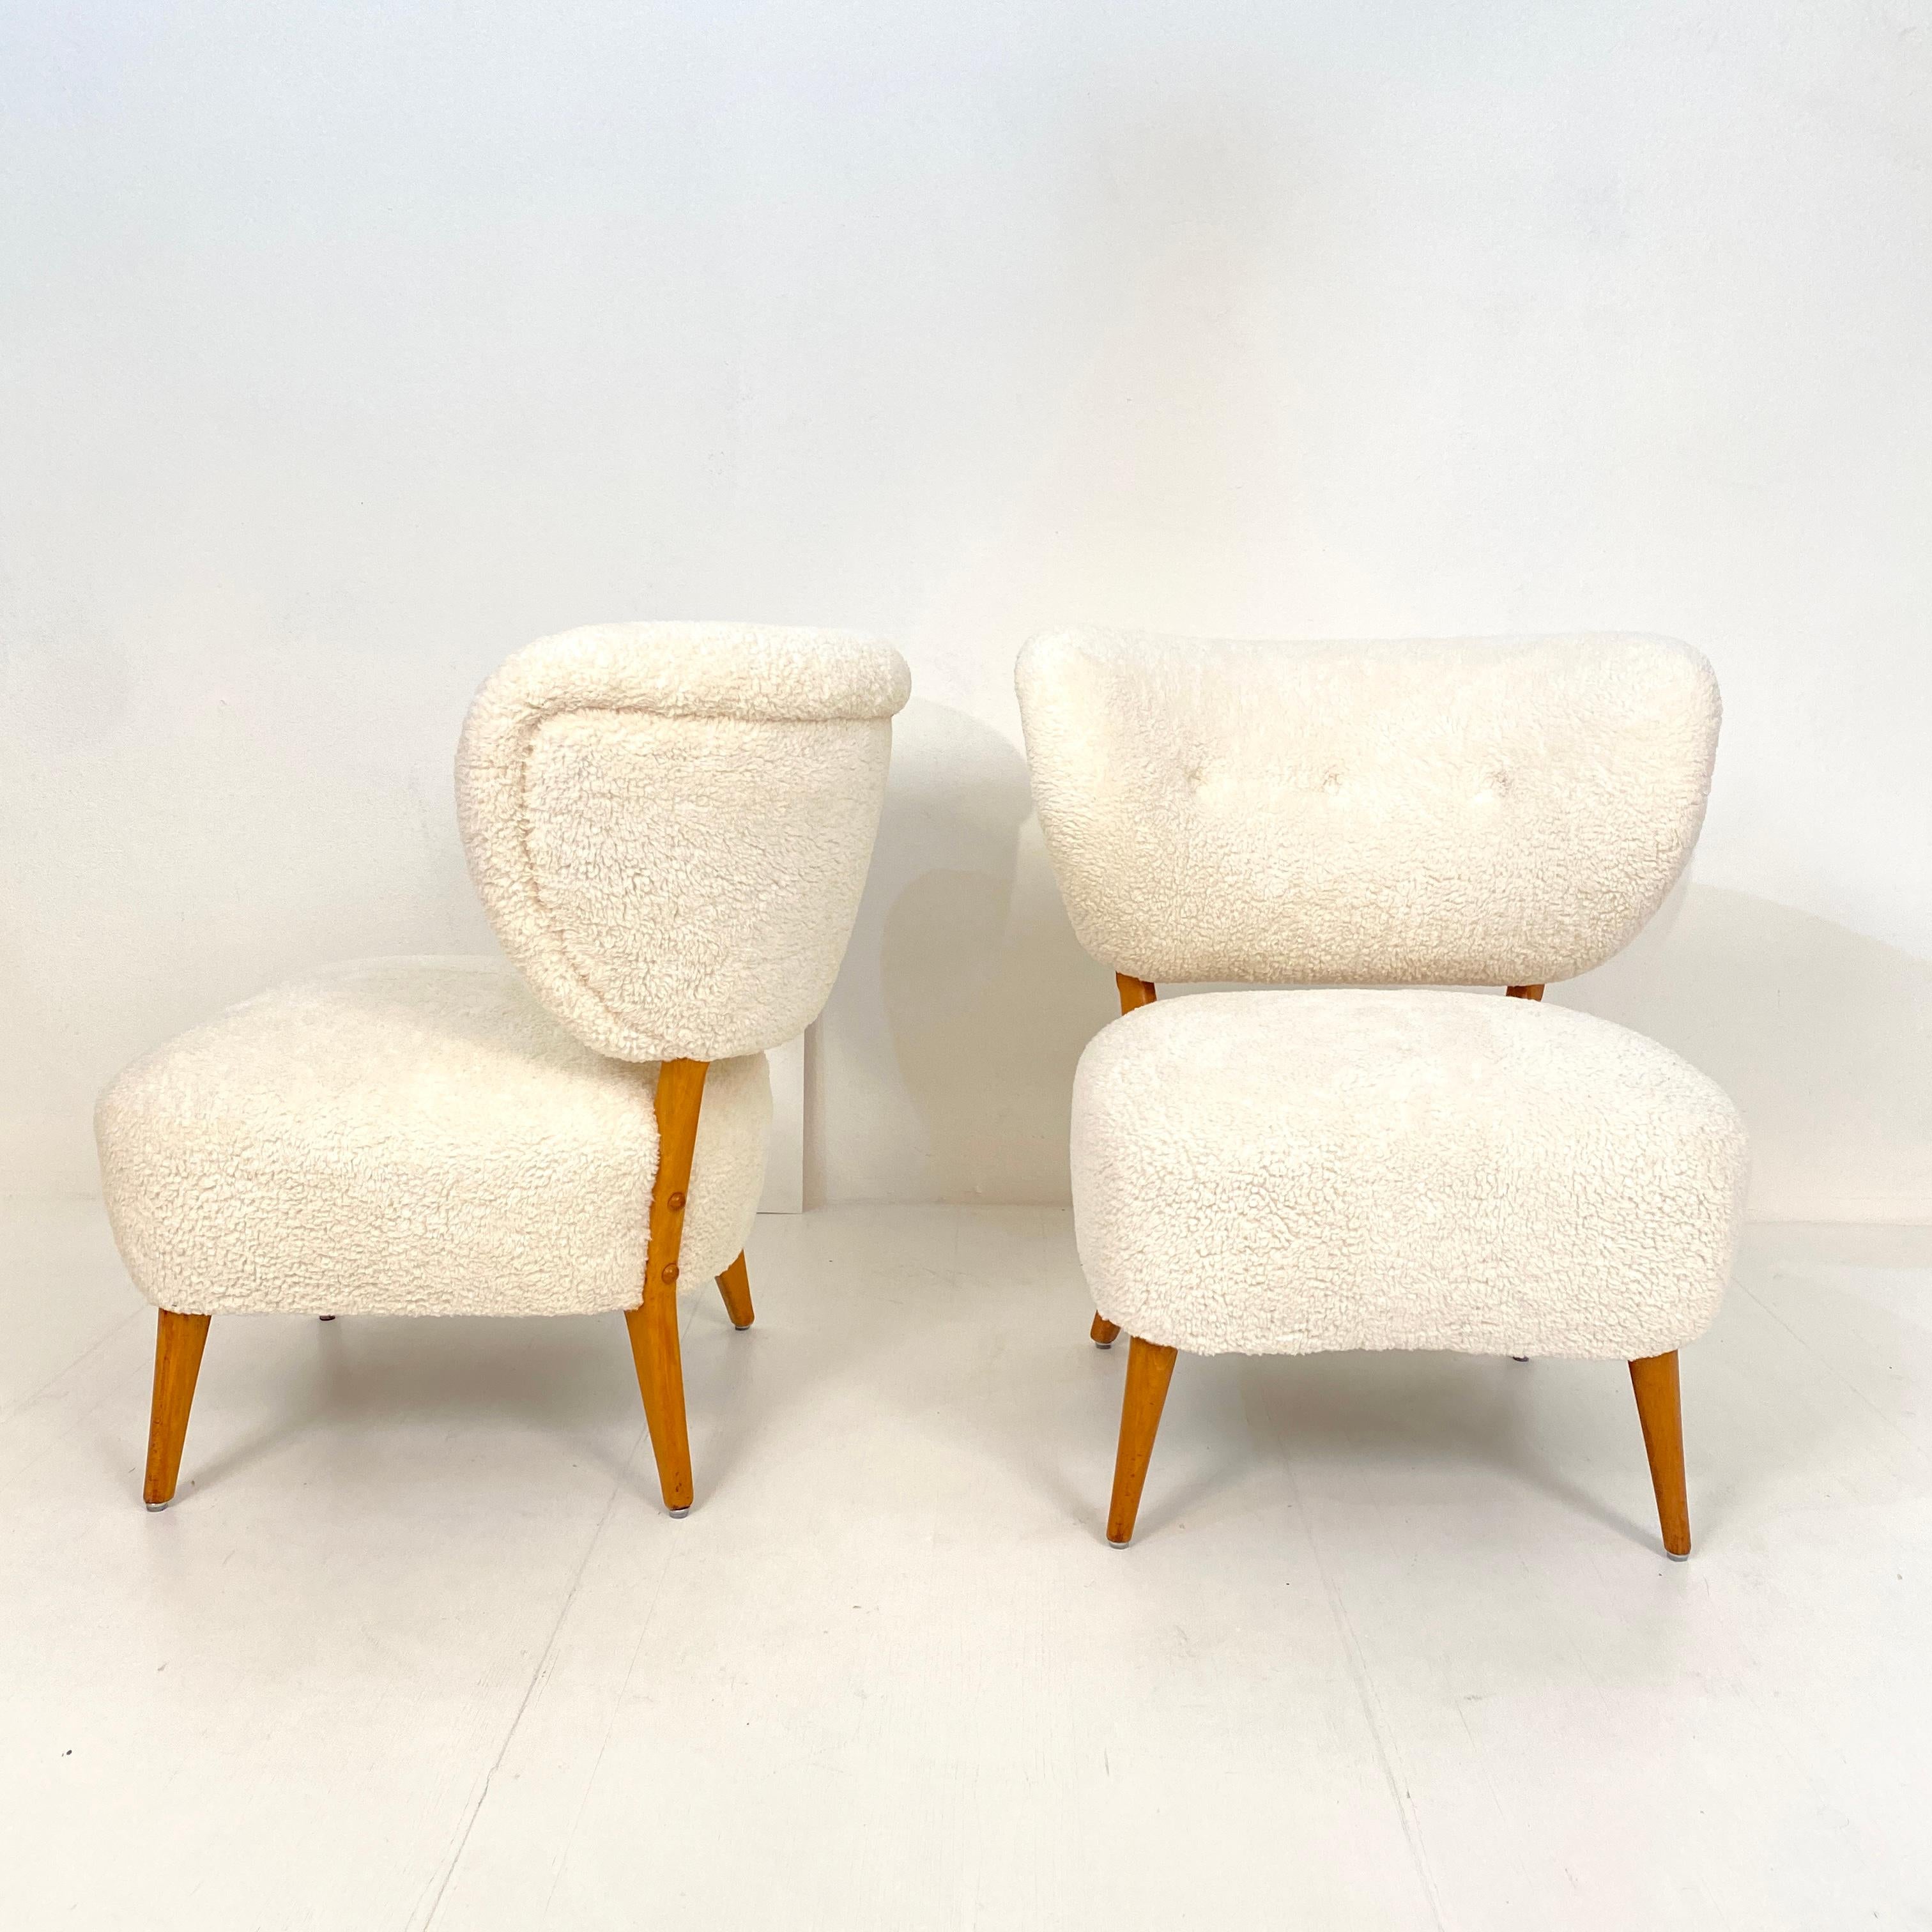 Swedish Pair of Boucle Mid-Century Lounge Chairs by Otto Schultz in Teddy Fur, 1950s